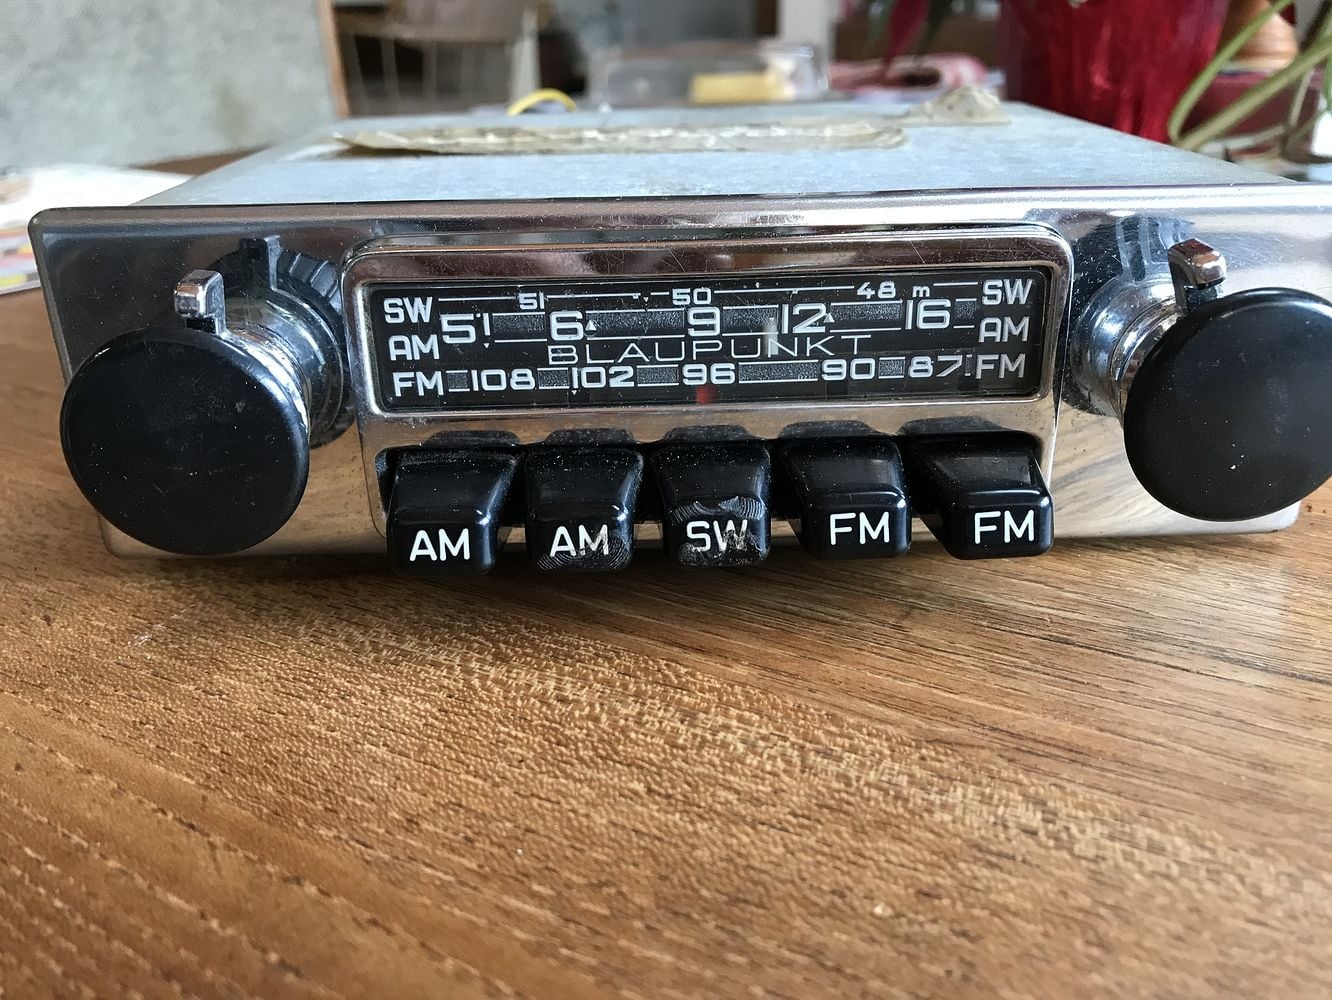 Audio Video/Electronics - Blaupunkt, Becker other period radios wanted - Used - 1963 to 1969 Any Make All Models - Newtown, PA 18940, United States